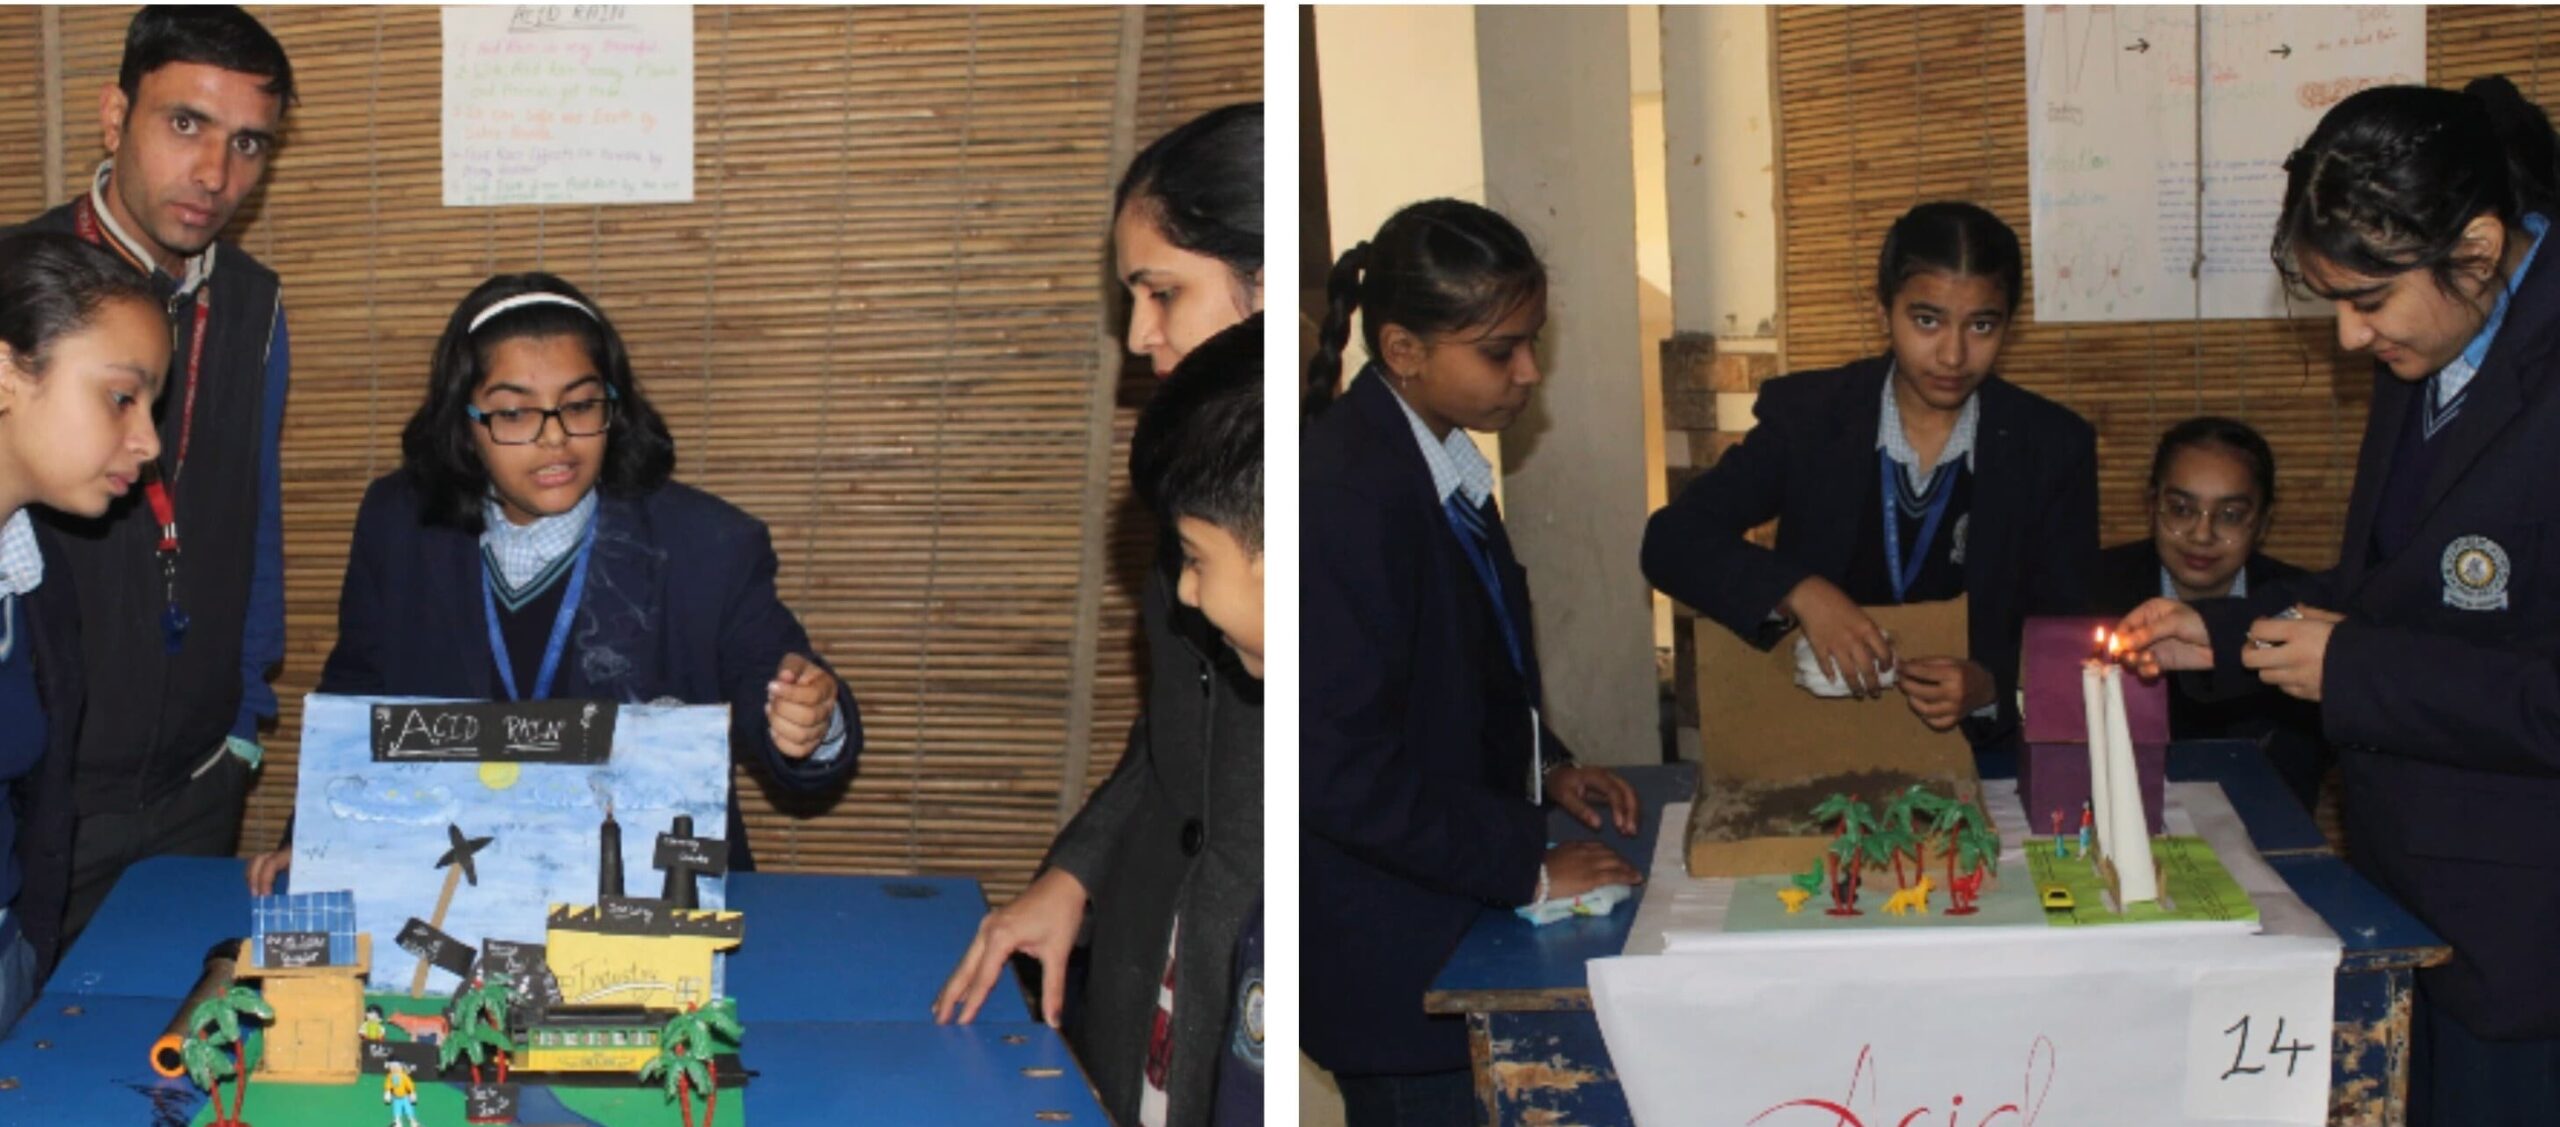 Children showed their talent in science exhibition open competition